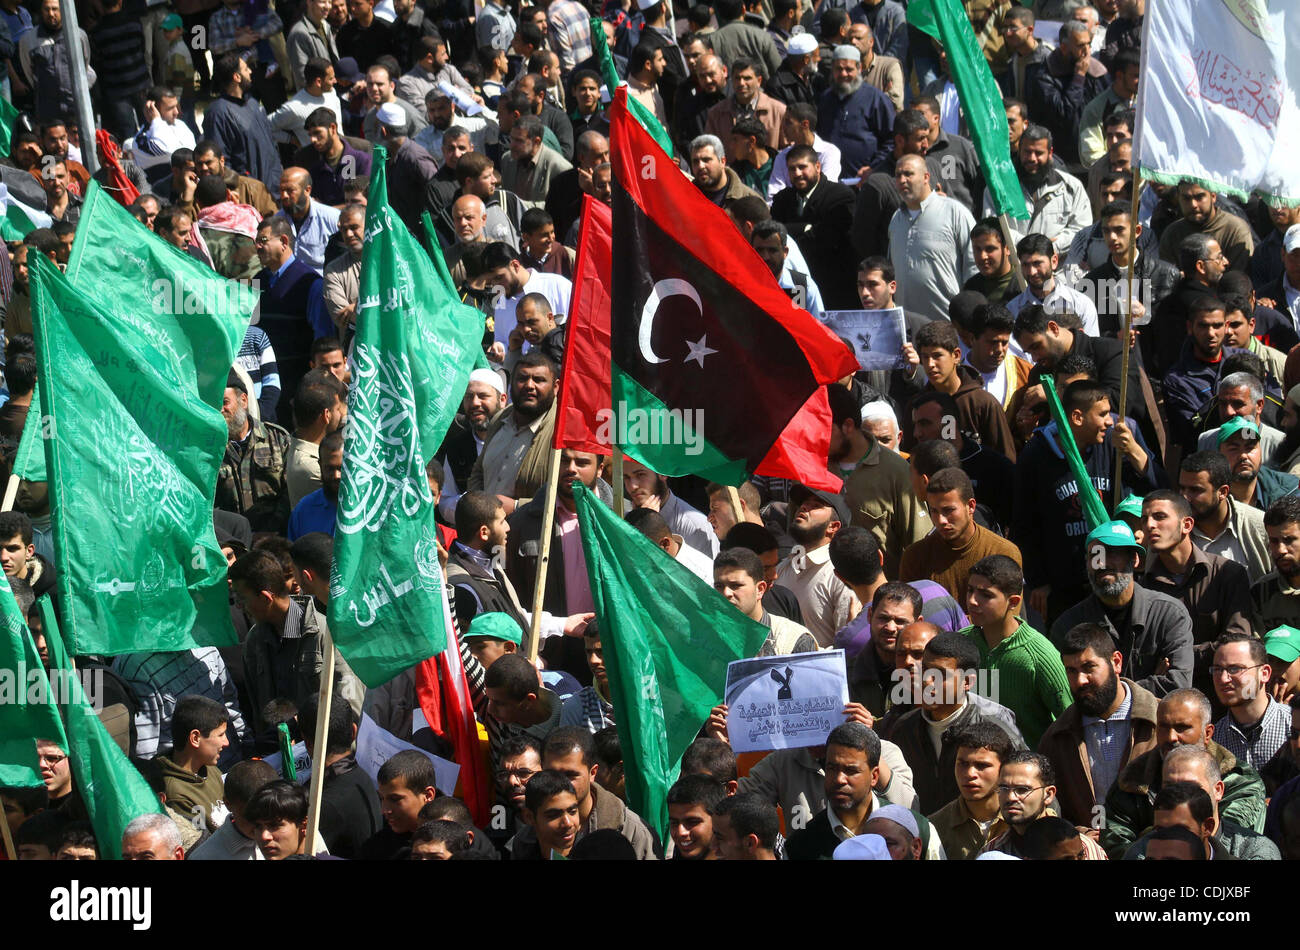 Palestinian Hamas supporters attend a Hamas rally in Gaza city, which called for an end to Palestinian divisions, March 4, 2011. Photo by Ashraf Amra Stock Photo